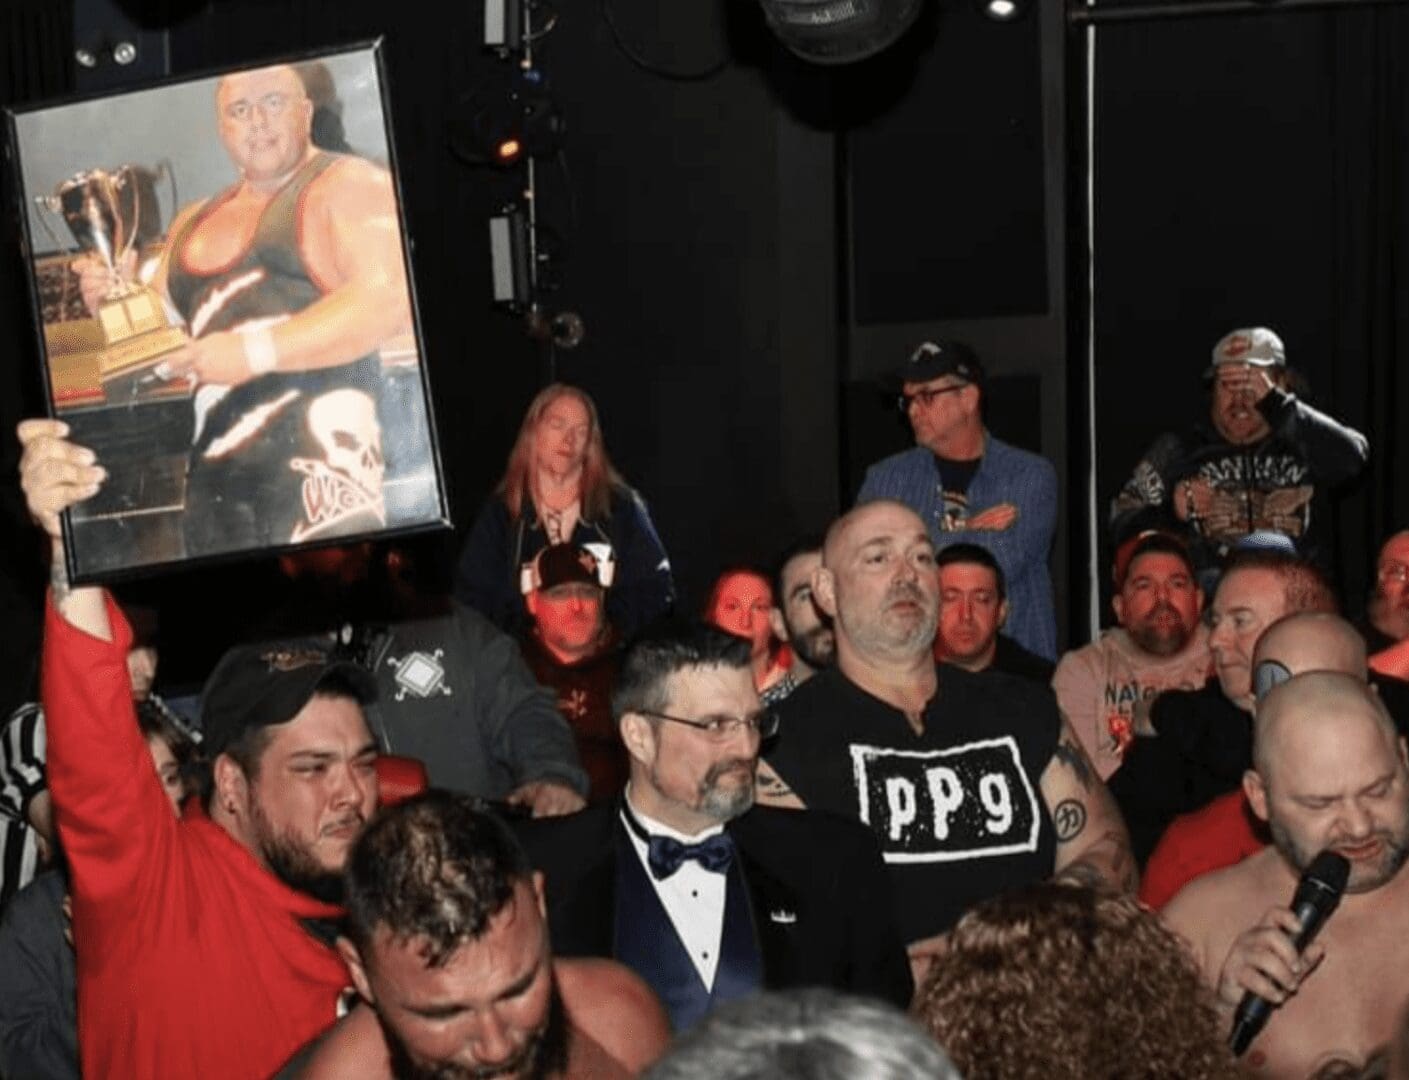 A group of people holding up a picture of a wrestler.